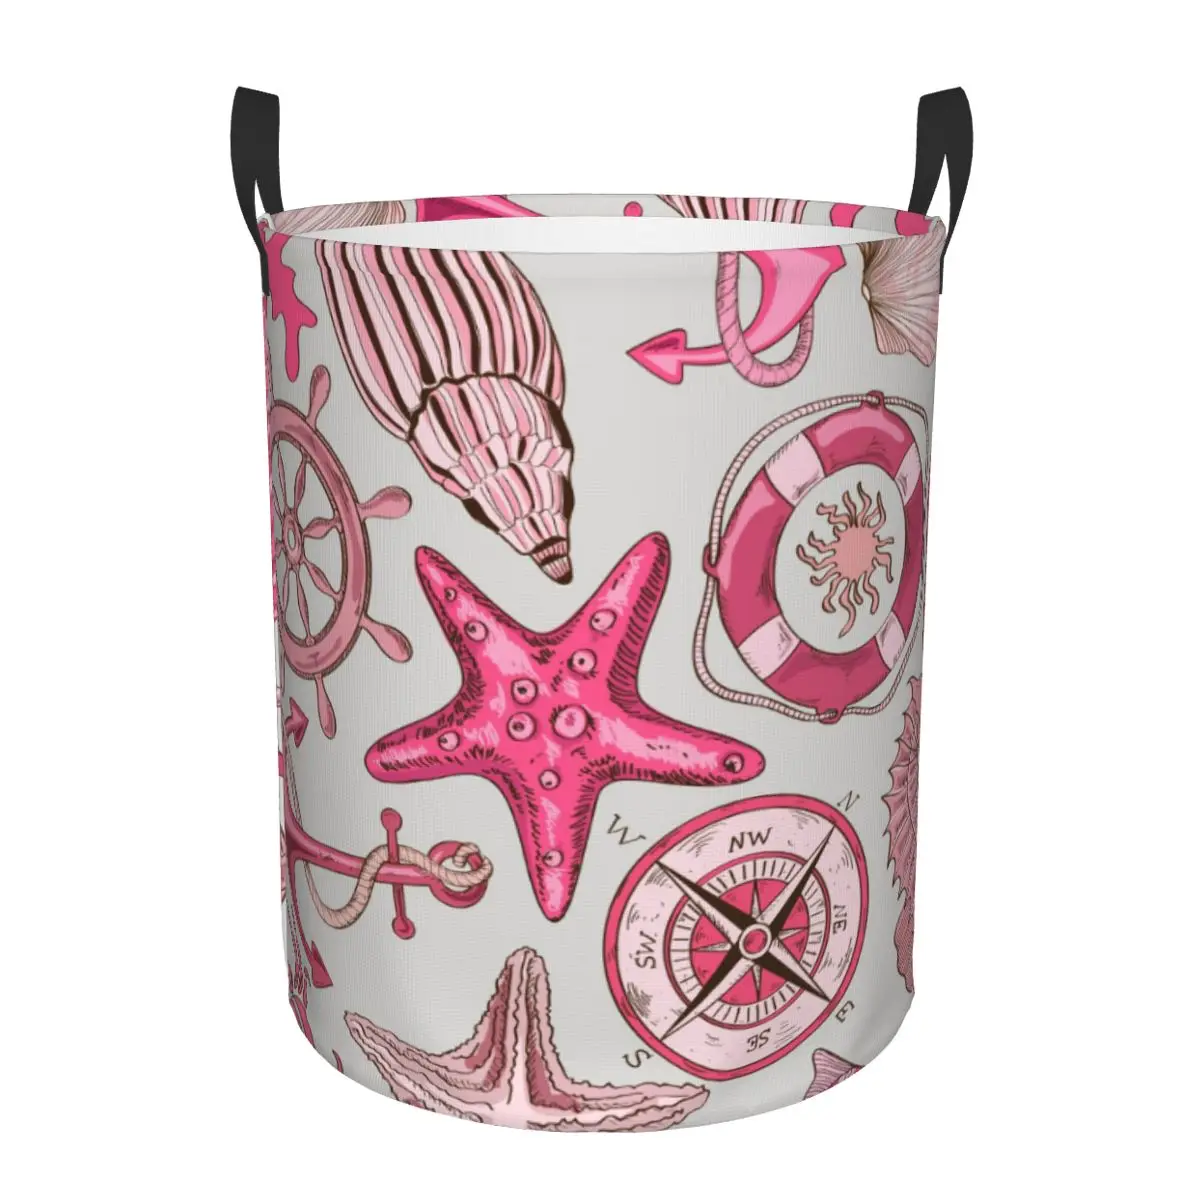 

Foldable Laundry Basket for Dirty Clothes Pink Sea Wheel Anchor Starfish Pattern Storage Hamper Kids Baby Home Organizer